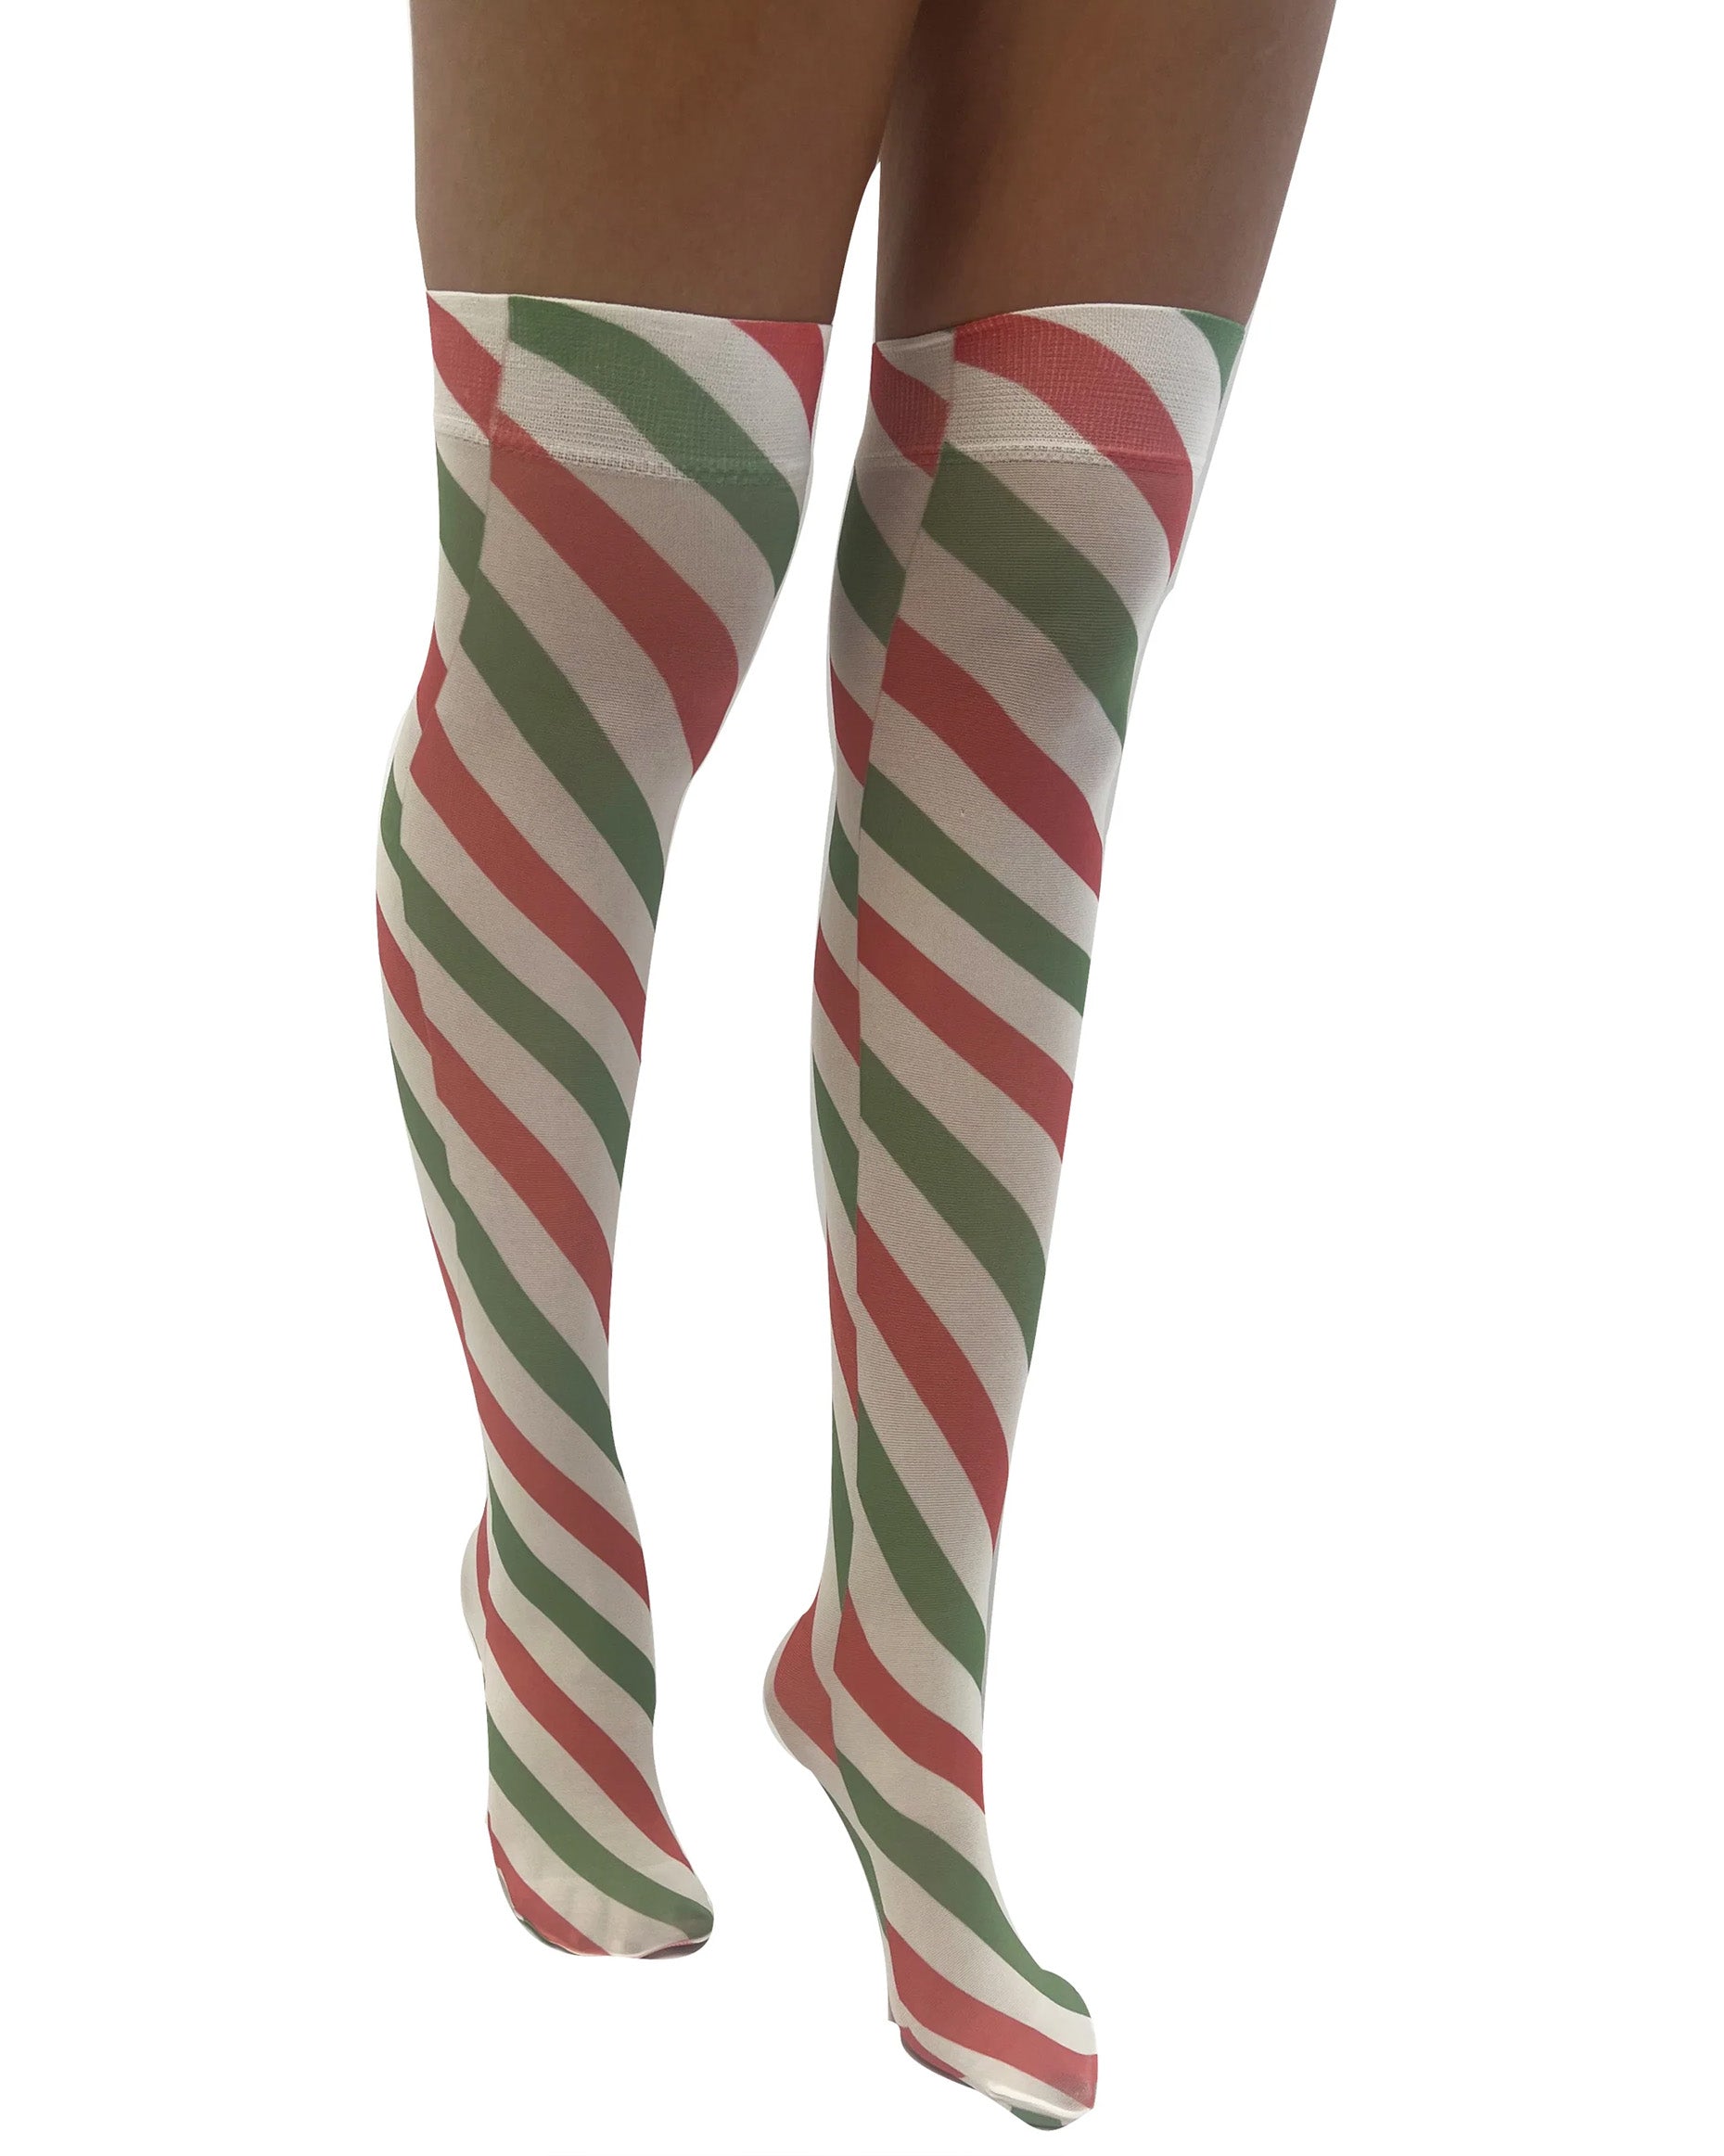 Pamela Mann Candy Cane Printed Over Knee Socks - White opaque over the knee socks with a green and red Christmas candy cane style stripe print.